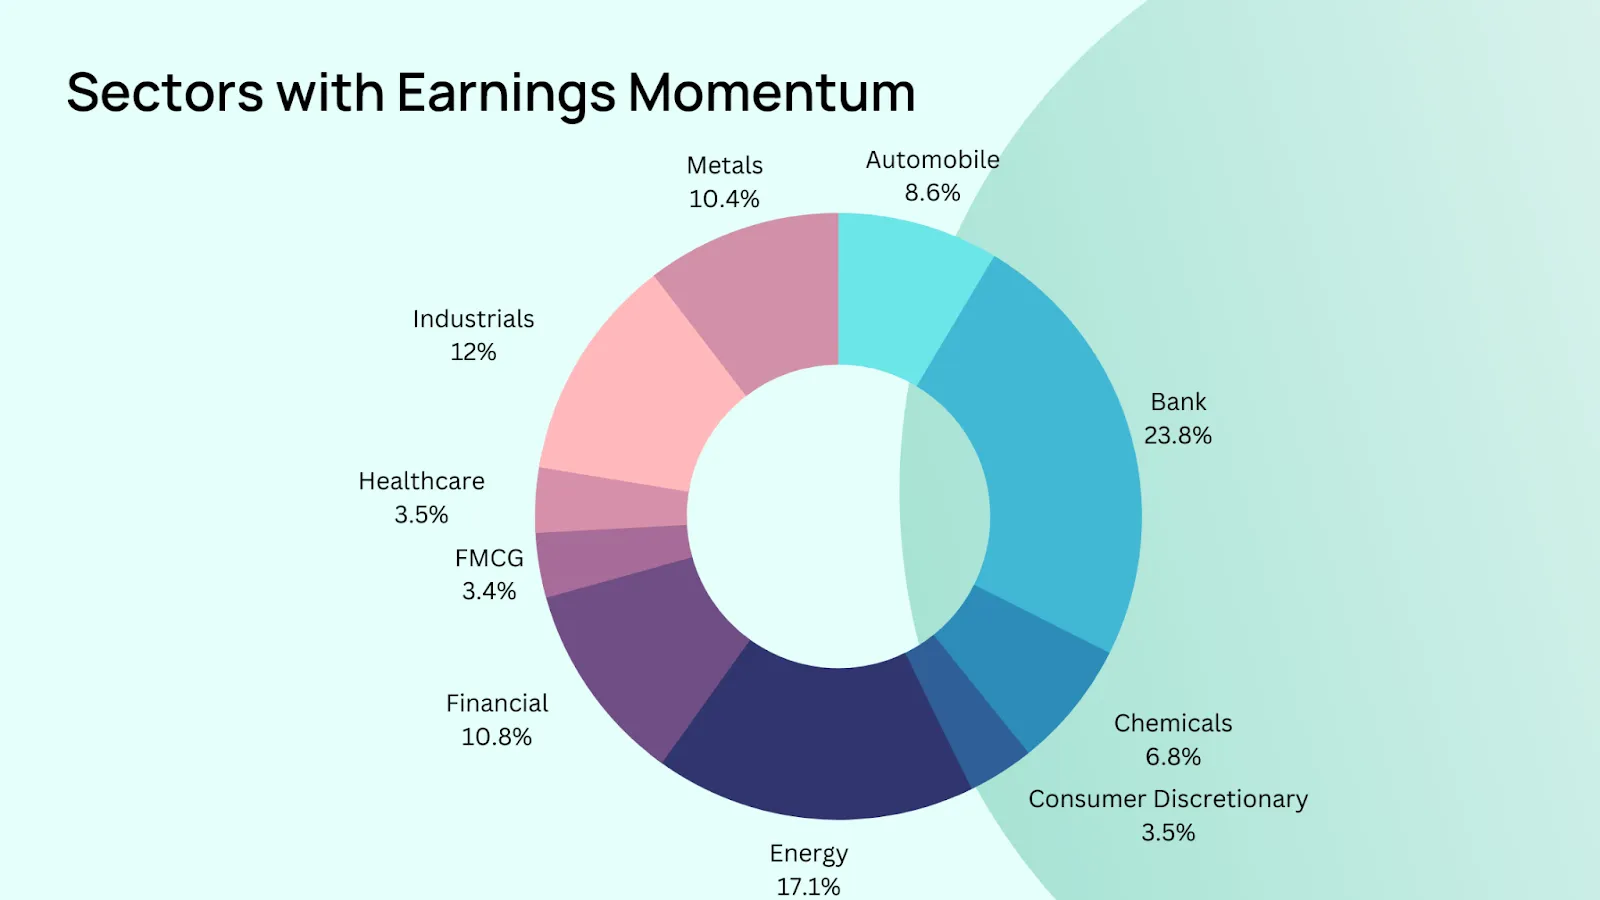 Sectors with earnings momentum